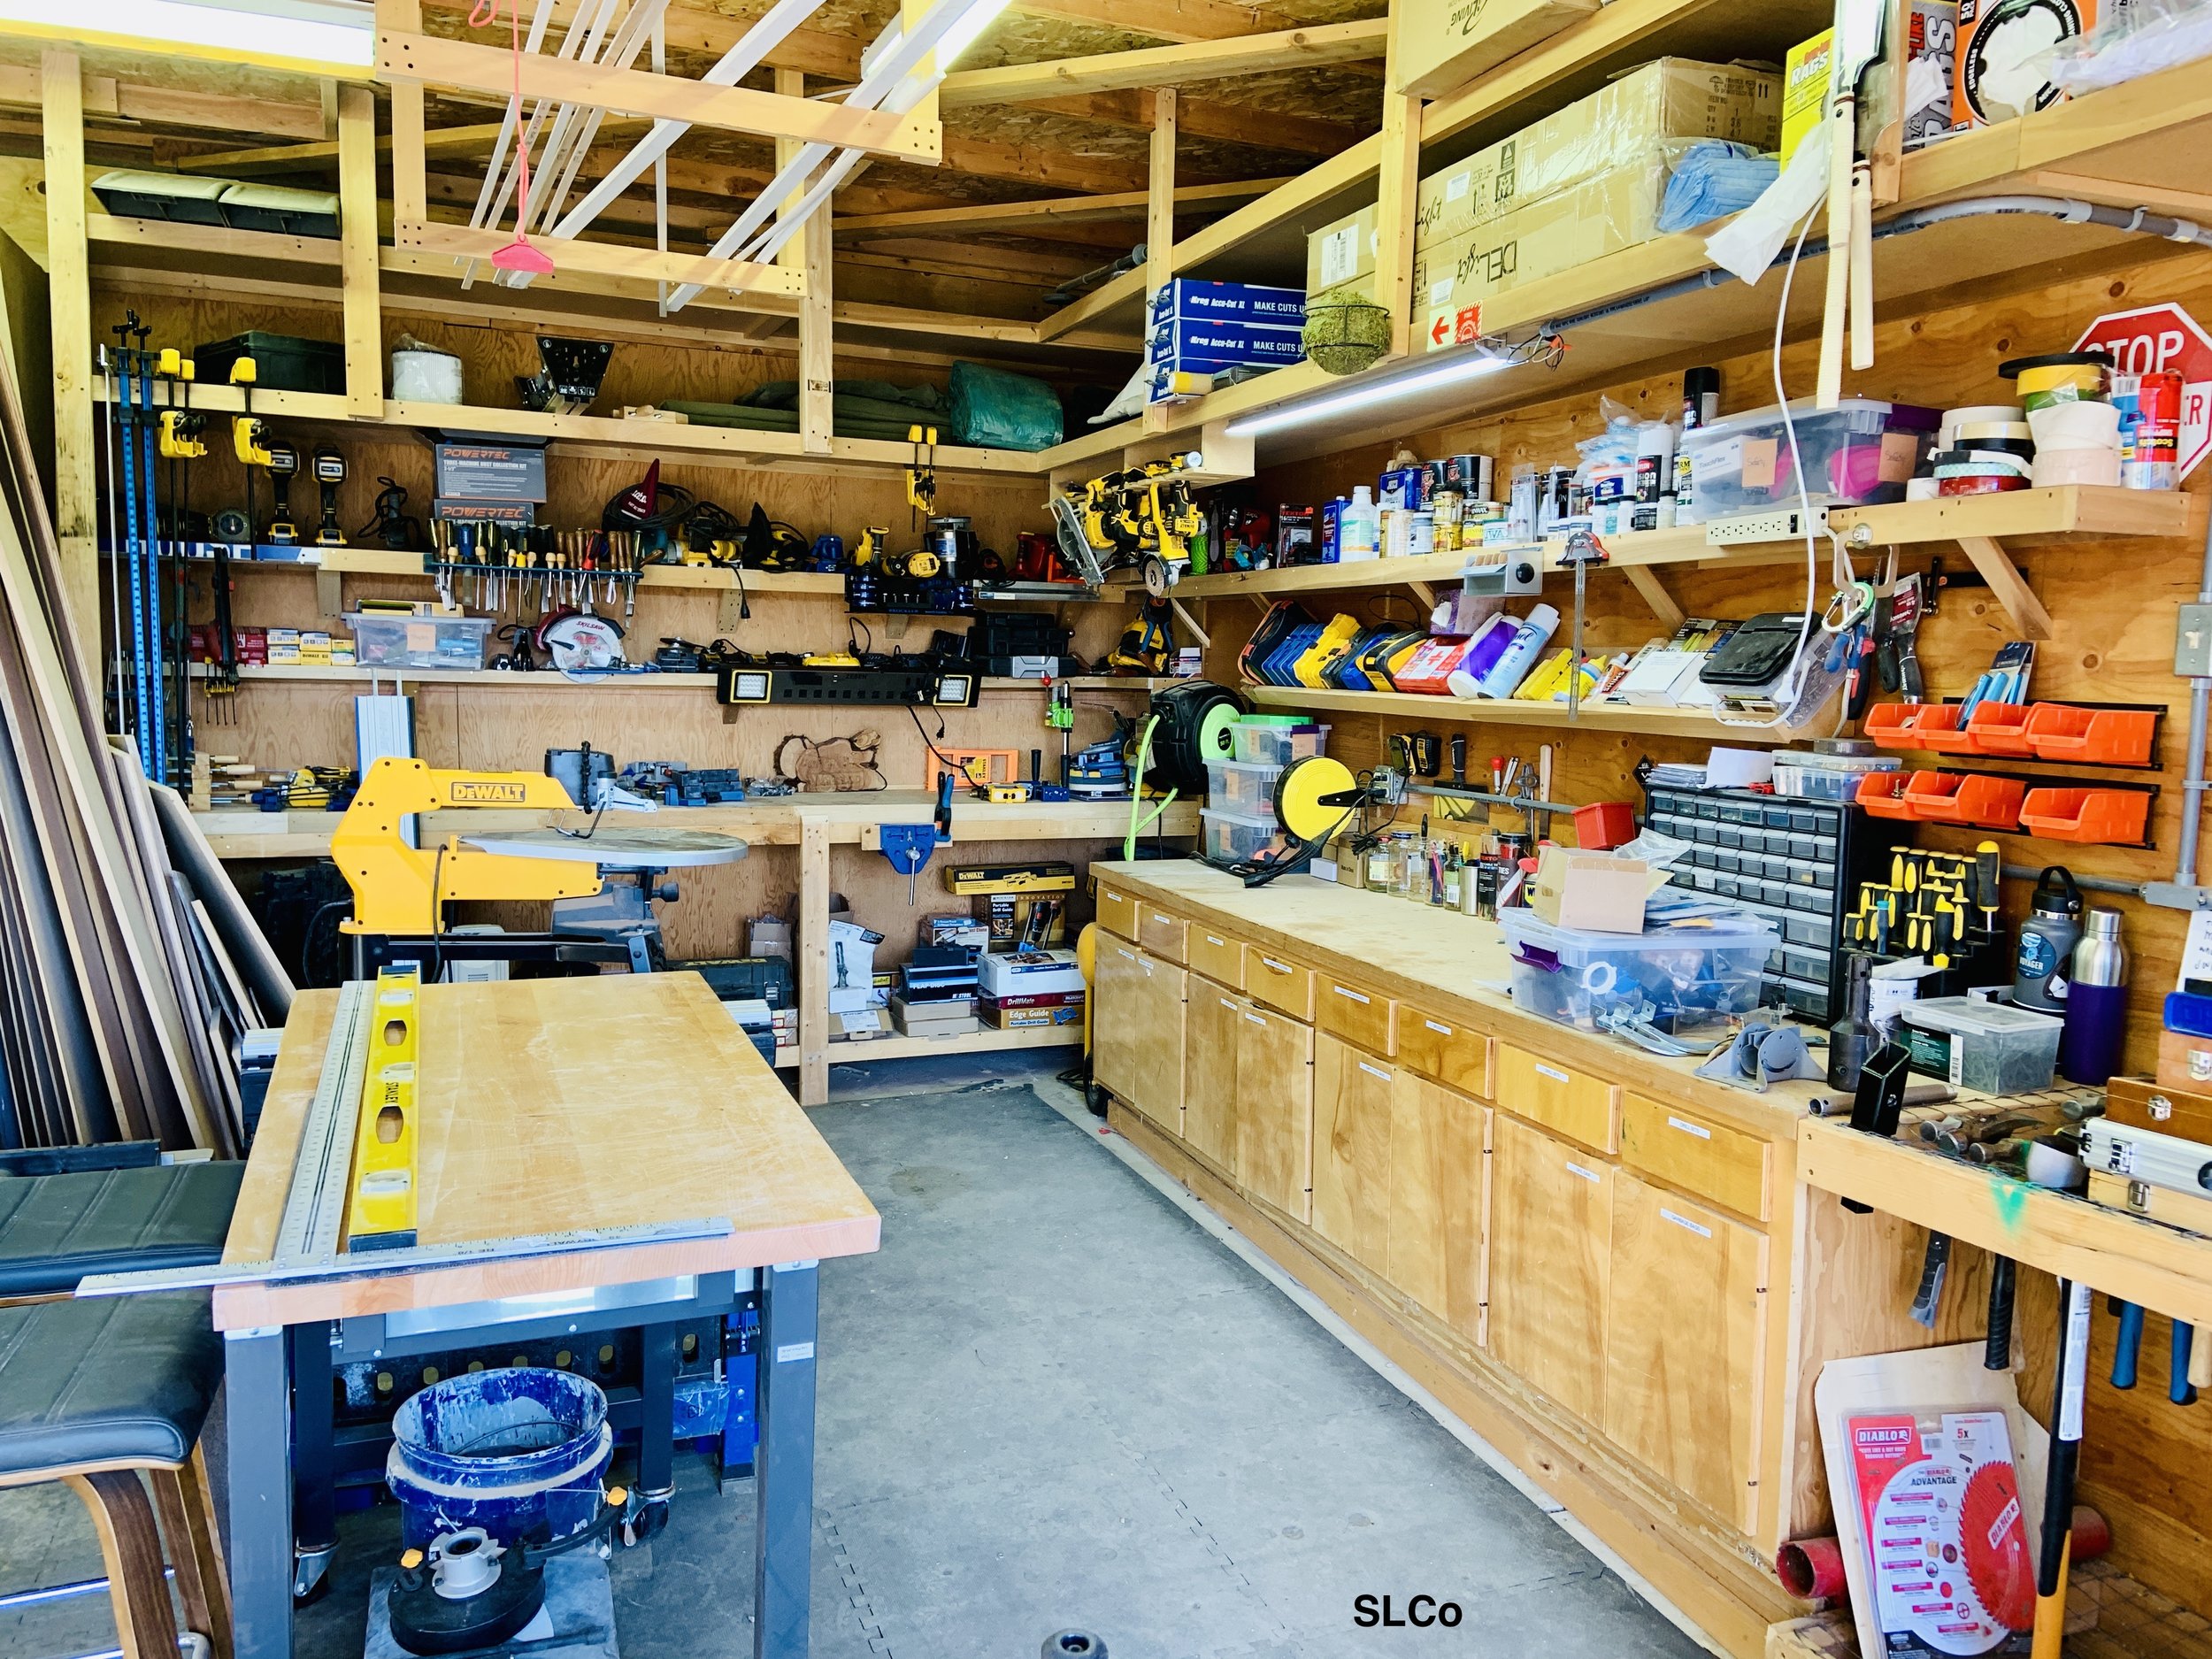 Workshop with tools in homes on walls and shelves and counters clear